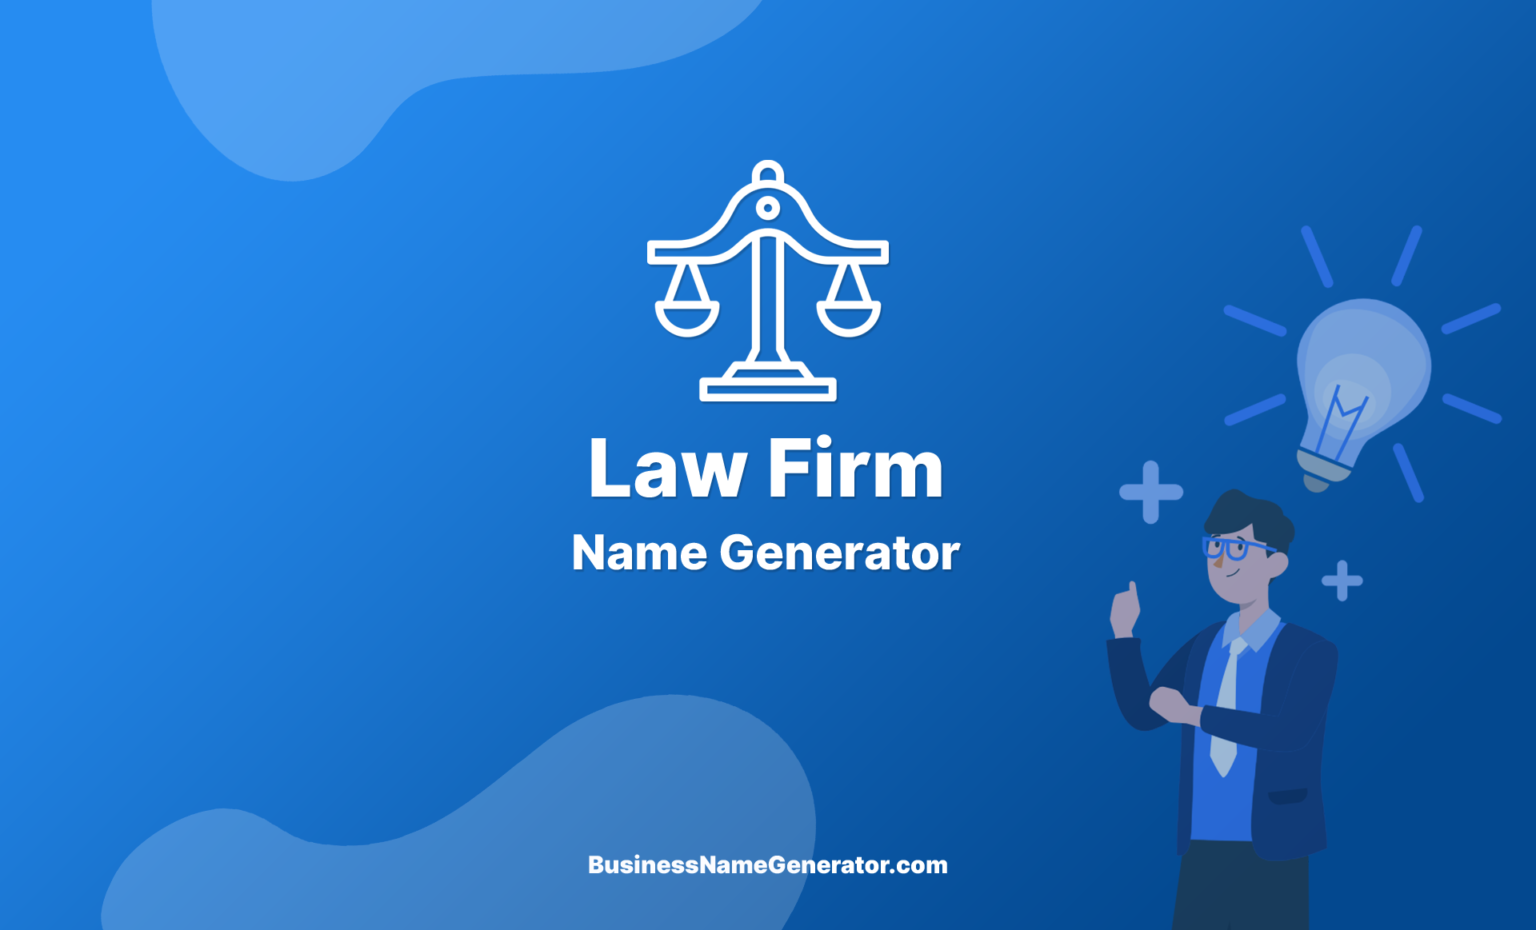 Law Firm Name Generator 1536x930 